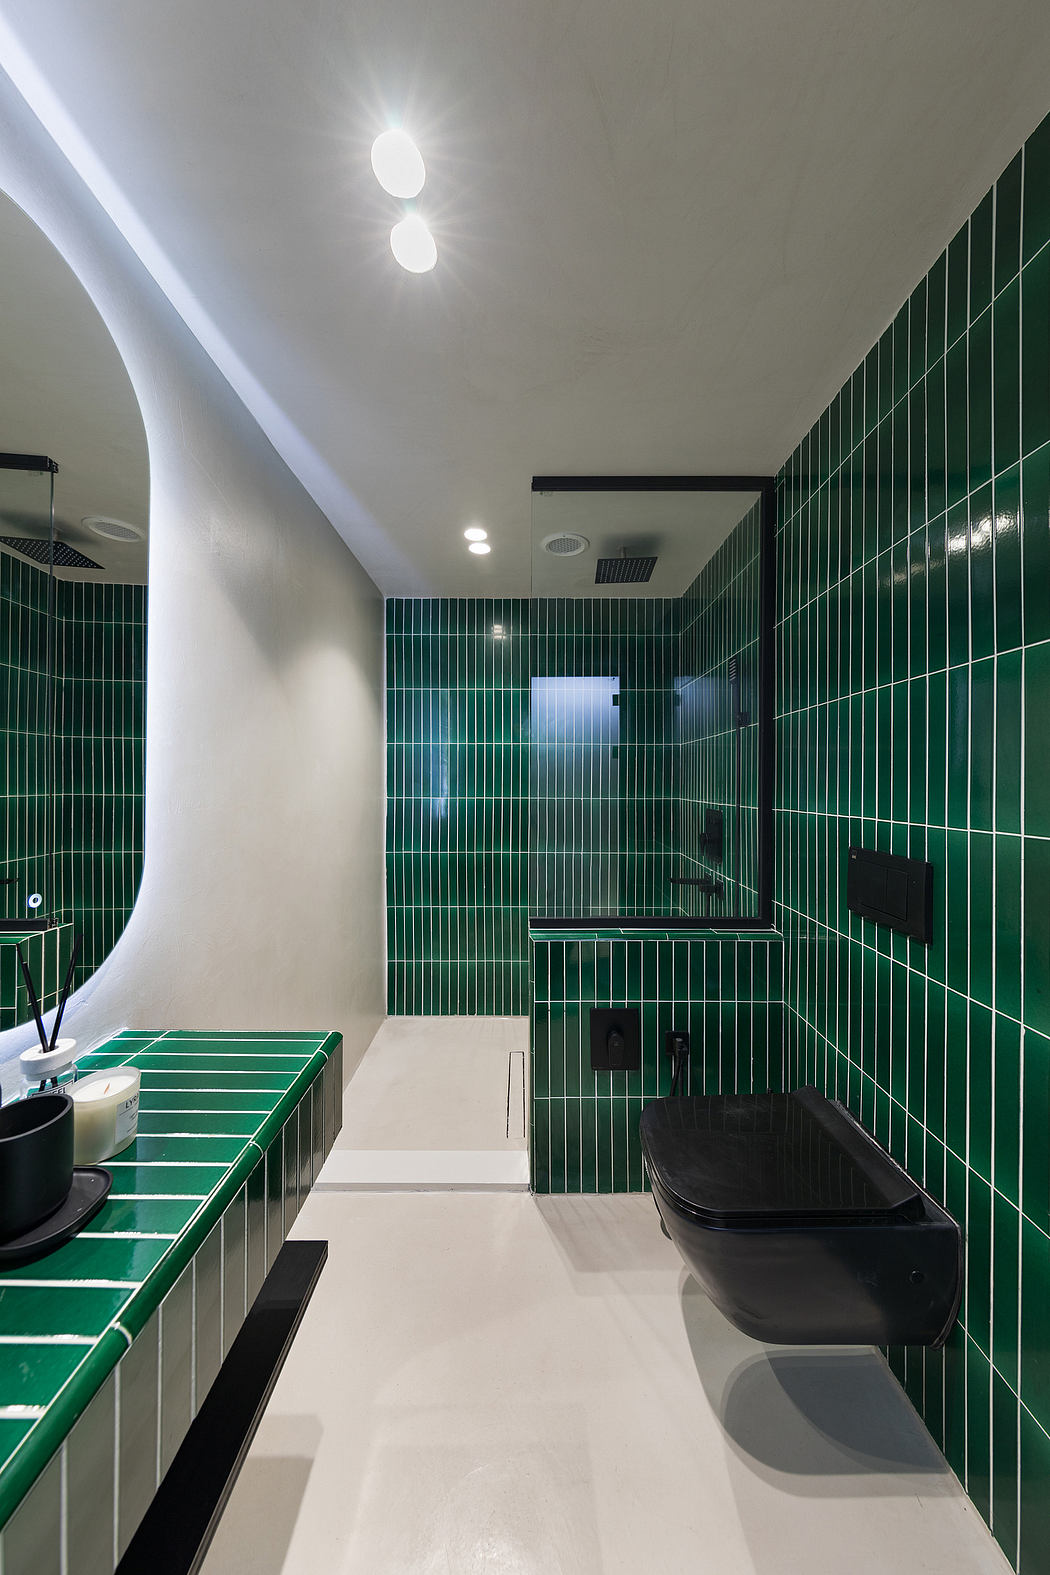 A modern bathroom interior with bold green tile walls, sleek fixtures, and recessed lighting.